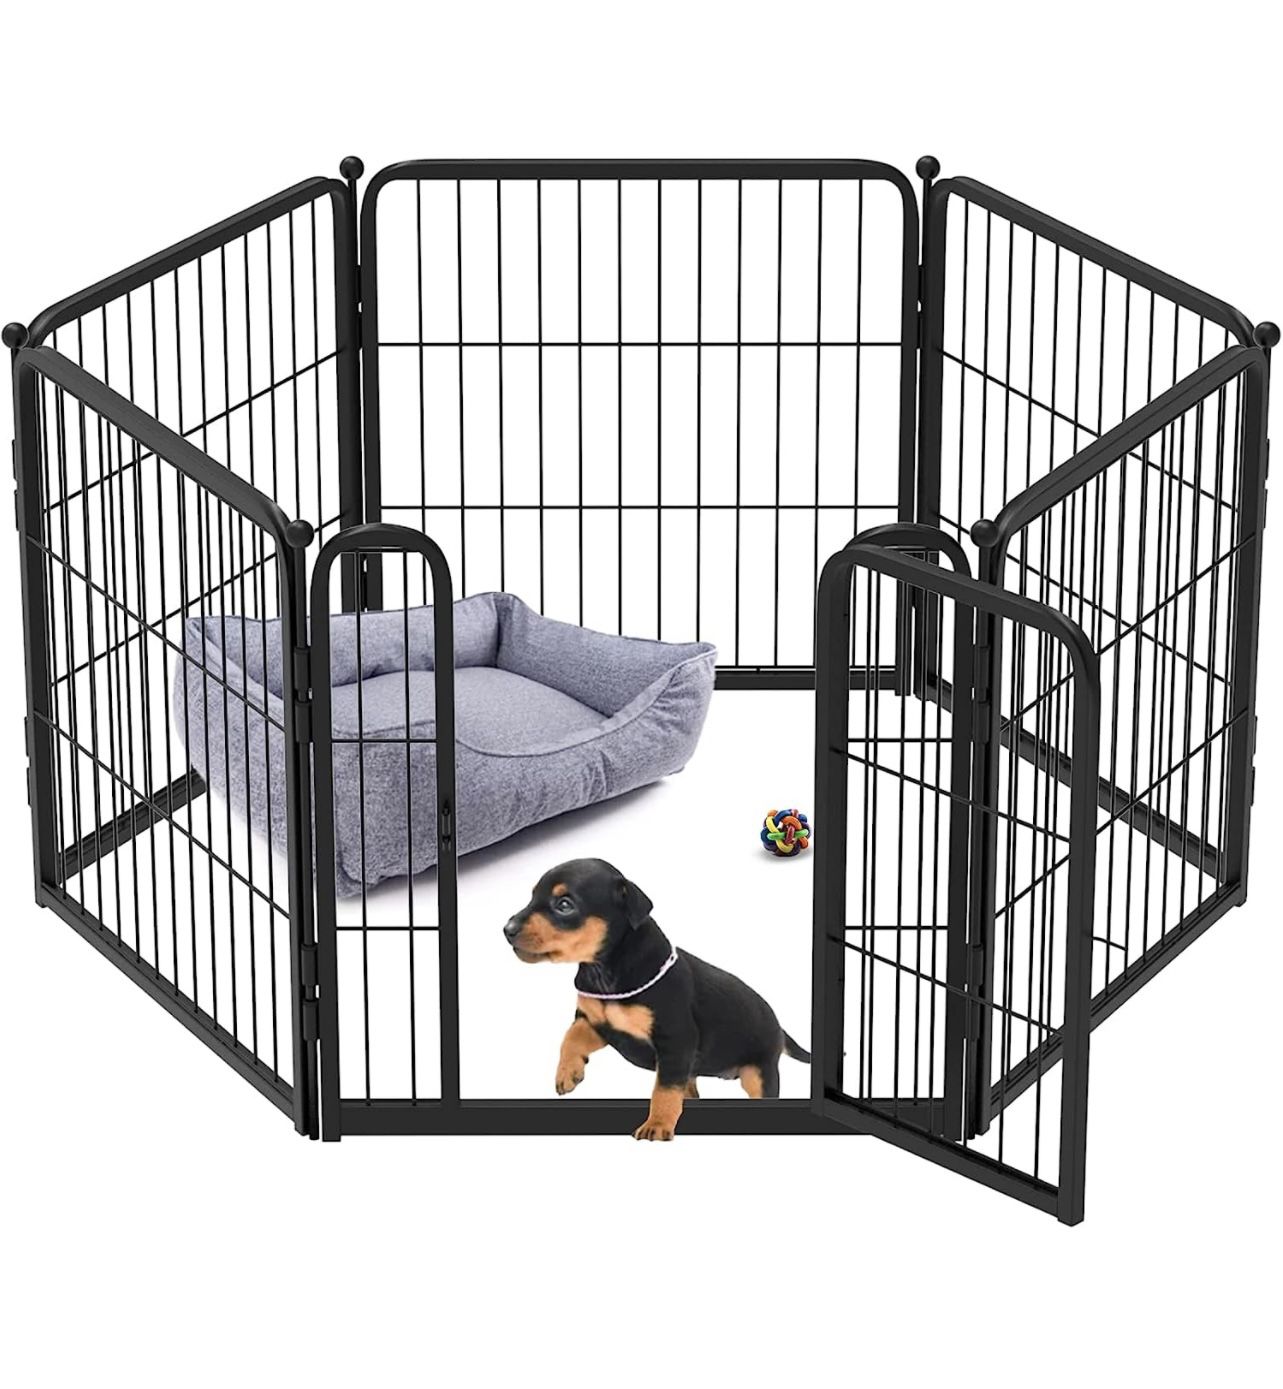 Dog Playpen Designed for Indoor Use, 24" Height for Puppy and Small Dogs│Patent Pending